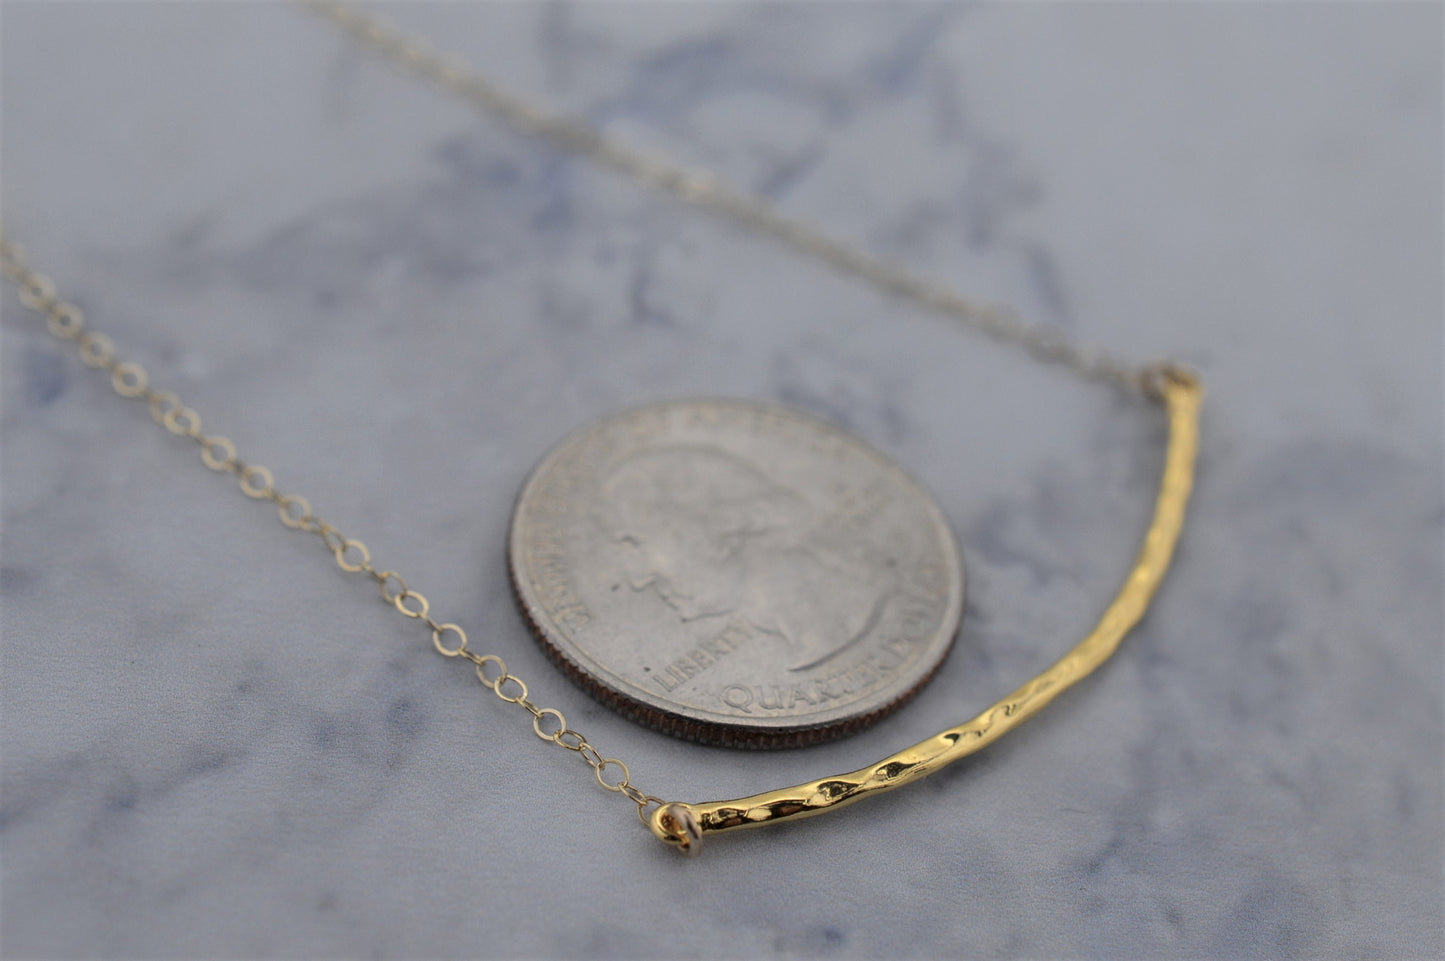 Gold Fill Hammered Bar Necklace